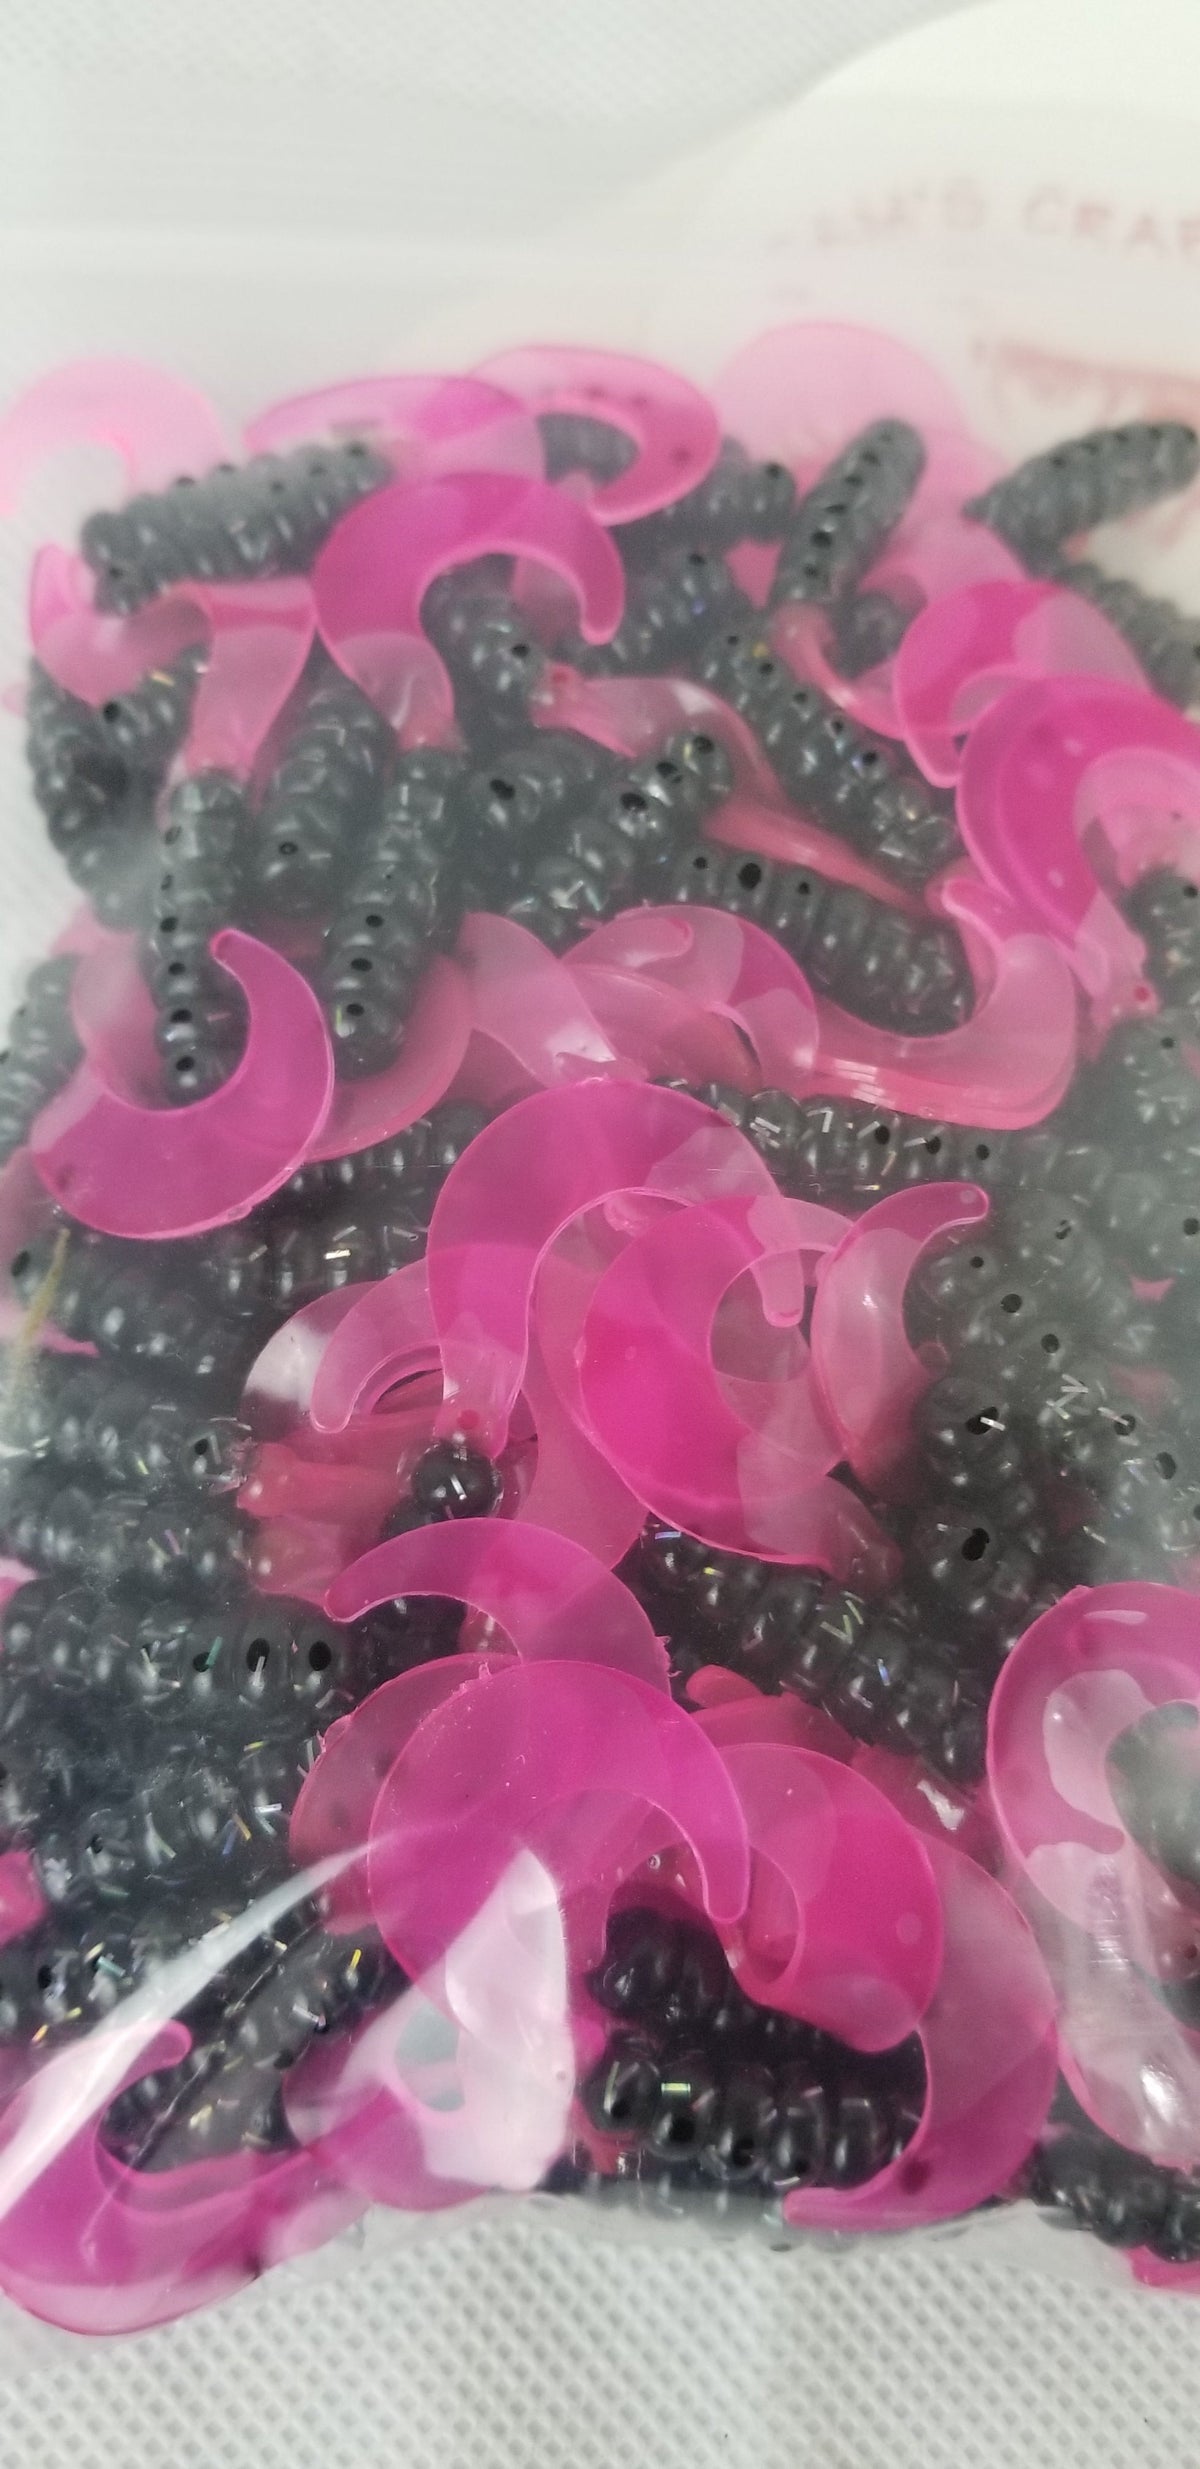 Cam's 2" BLACK BLAZE (HOLOGRAM FLAKE)  Curly Tail Grub 100pc  Crappie Soft Jigs  [A Cam's Exclusive]